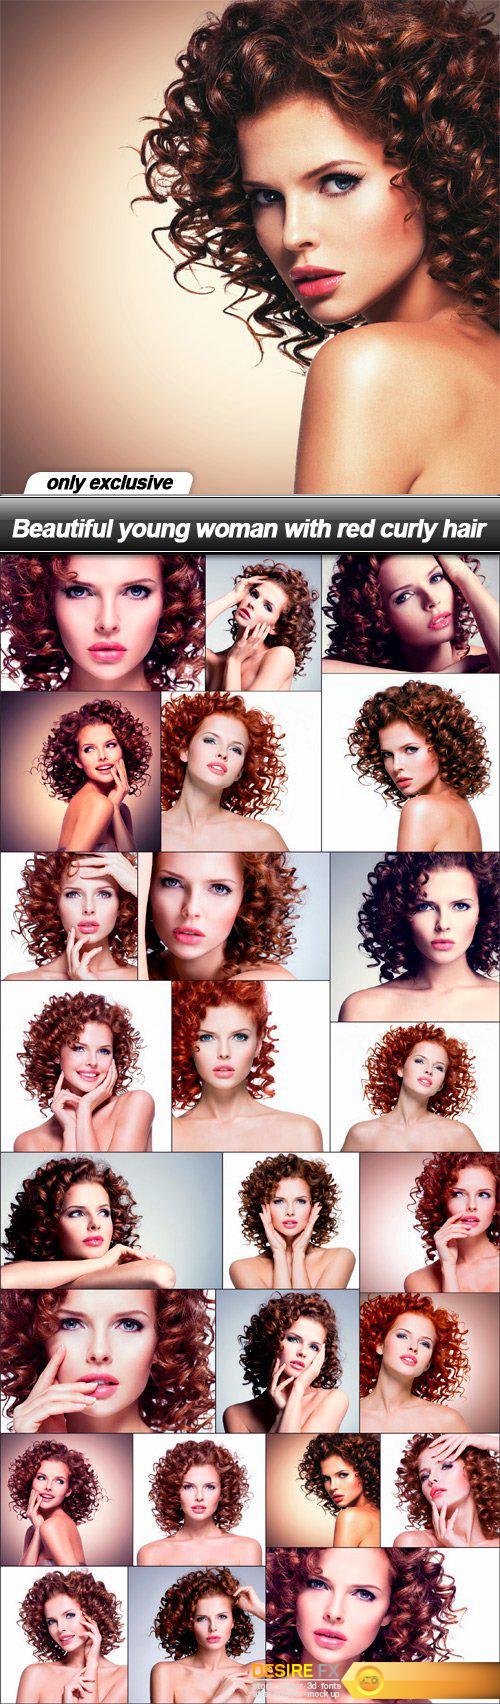 Beautiful young woman with red curly hair - 25 UHQ JPEG